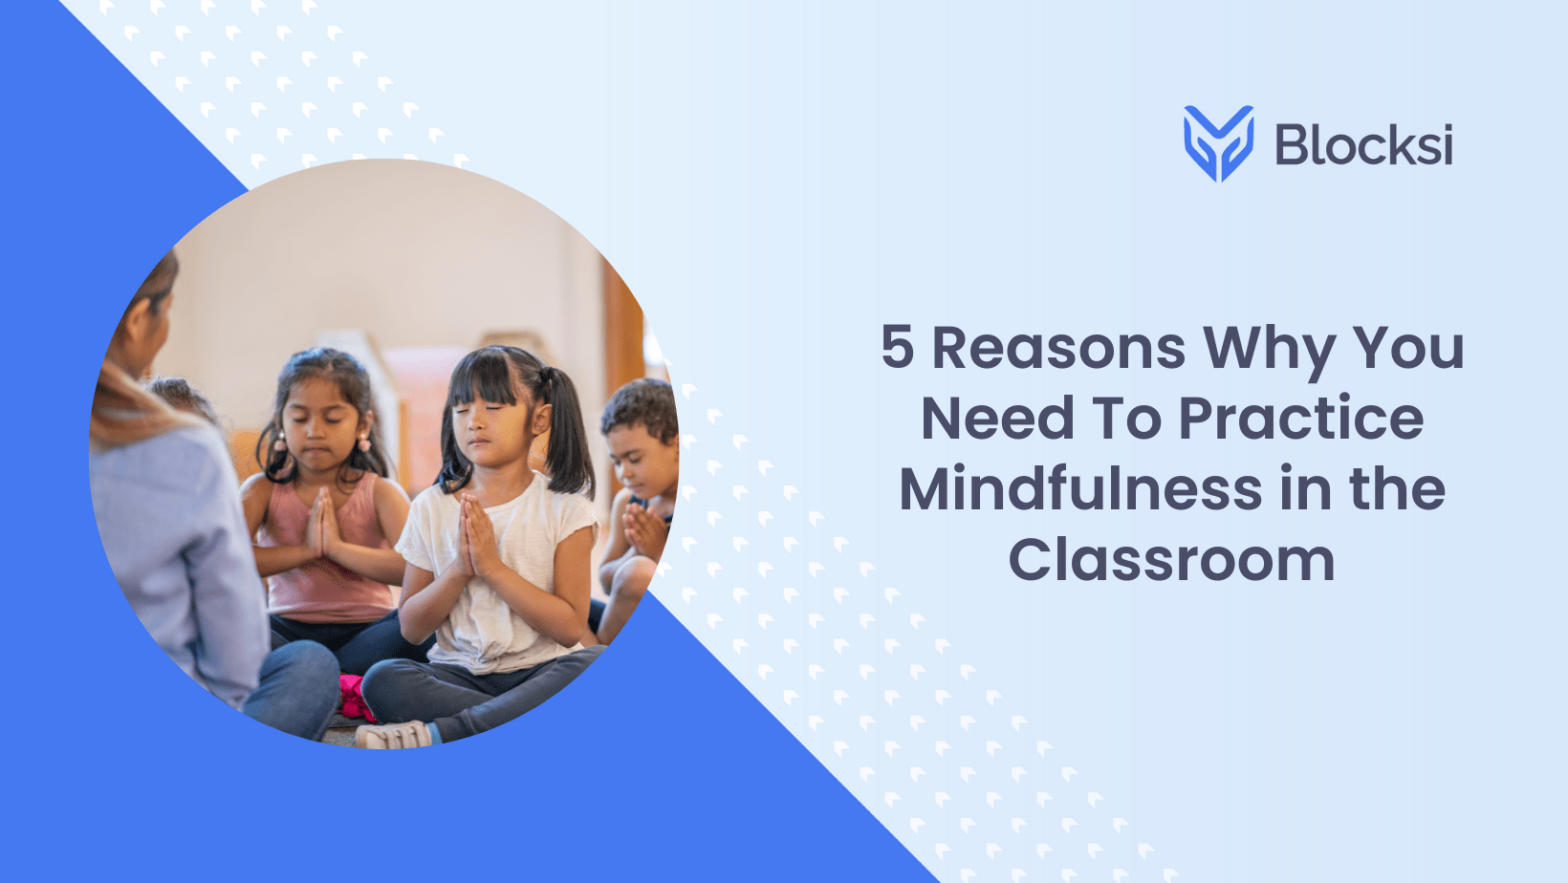 5 Reasons Why You Need To Practice Mindfulness in the Classroom